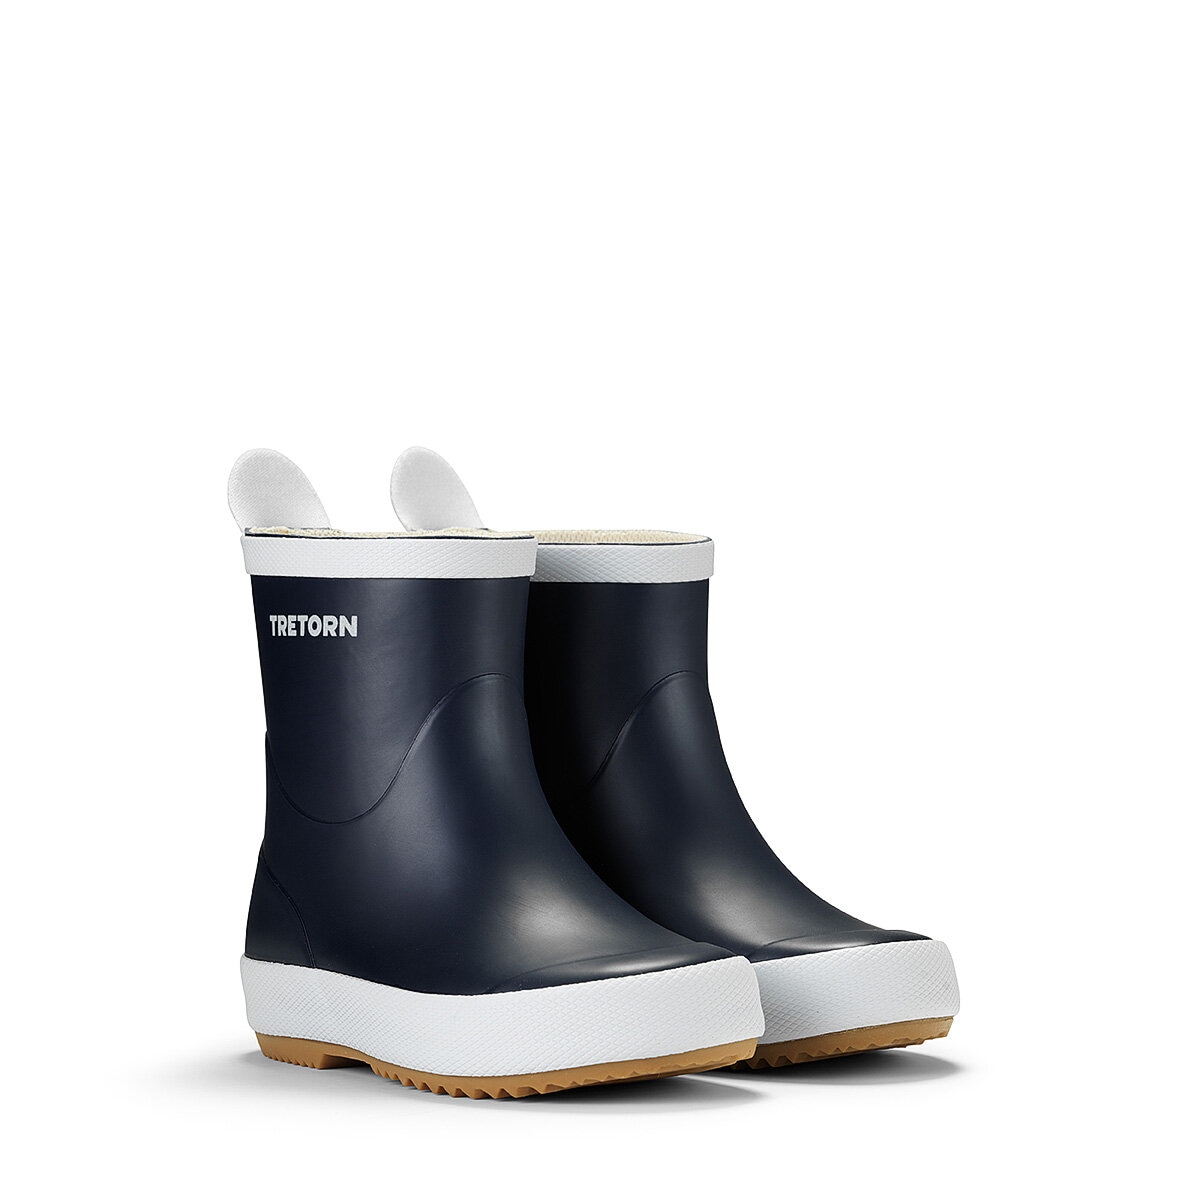 Wings Kids rubber boots by Tretorn for children in the colour blue